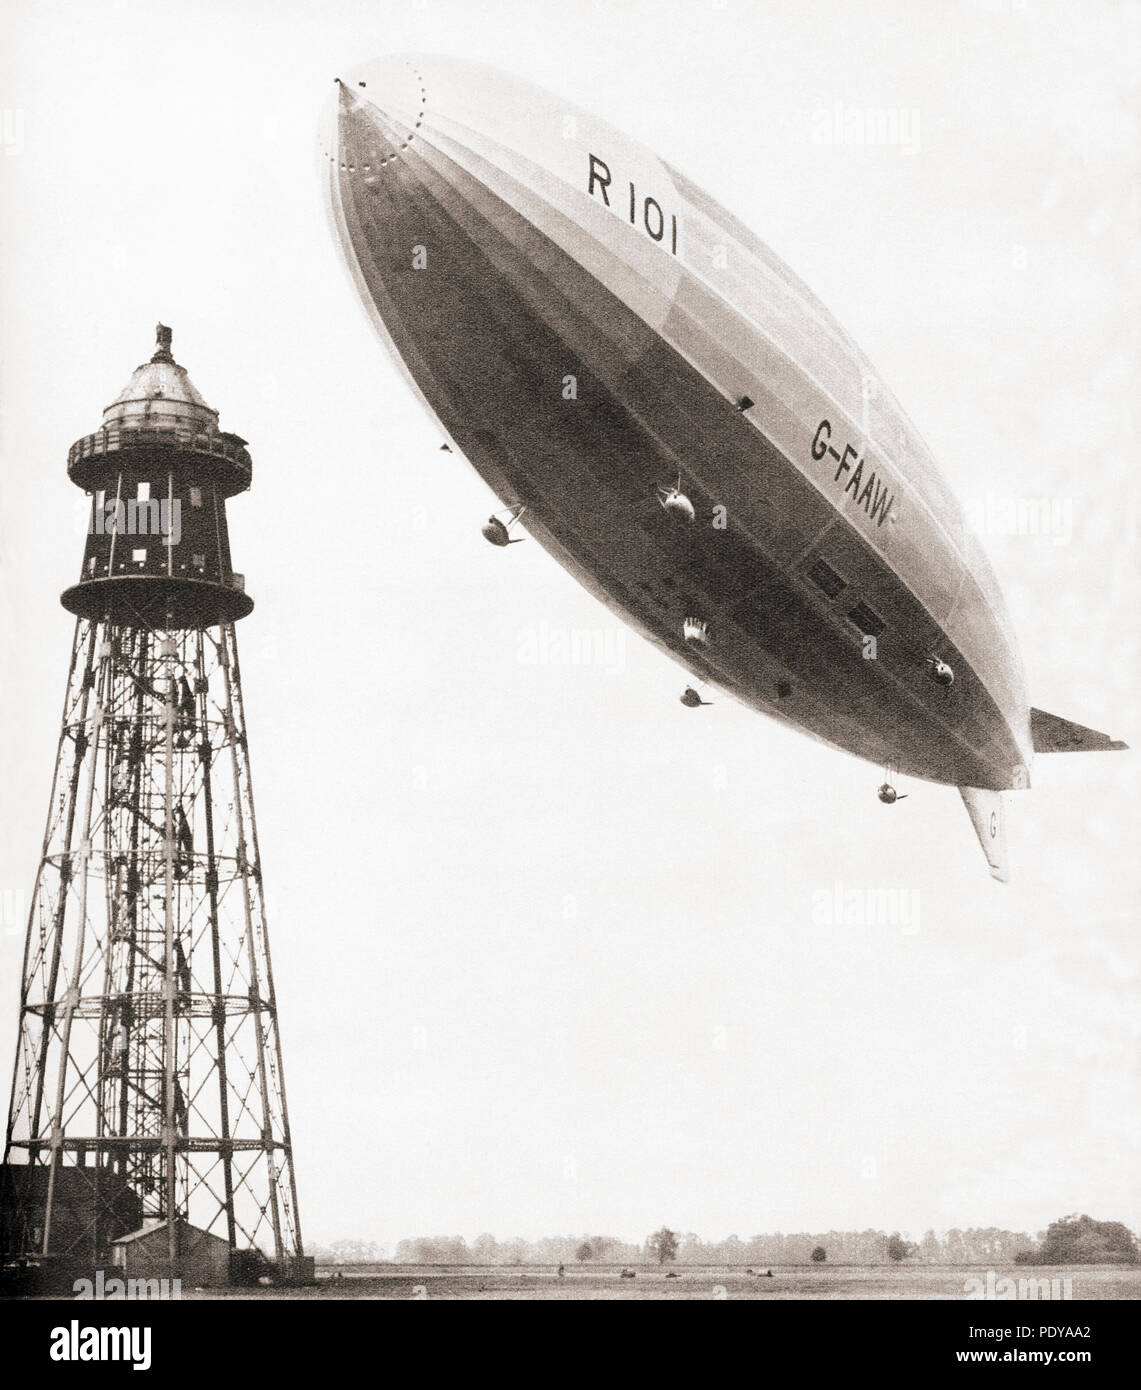 The final flight of the British rigid airship R101 which crashed during bad weather conditions over France in 1930.  48 of the 54 people aboard perished in the accident.  From These Tremendous Years, published 1938. Stock Photo